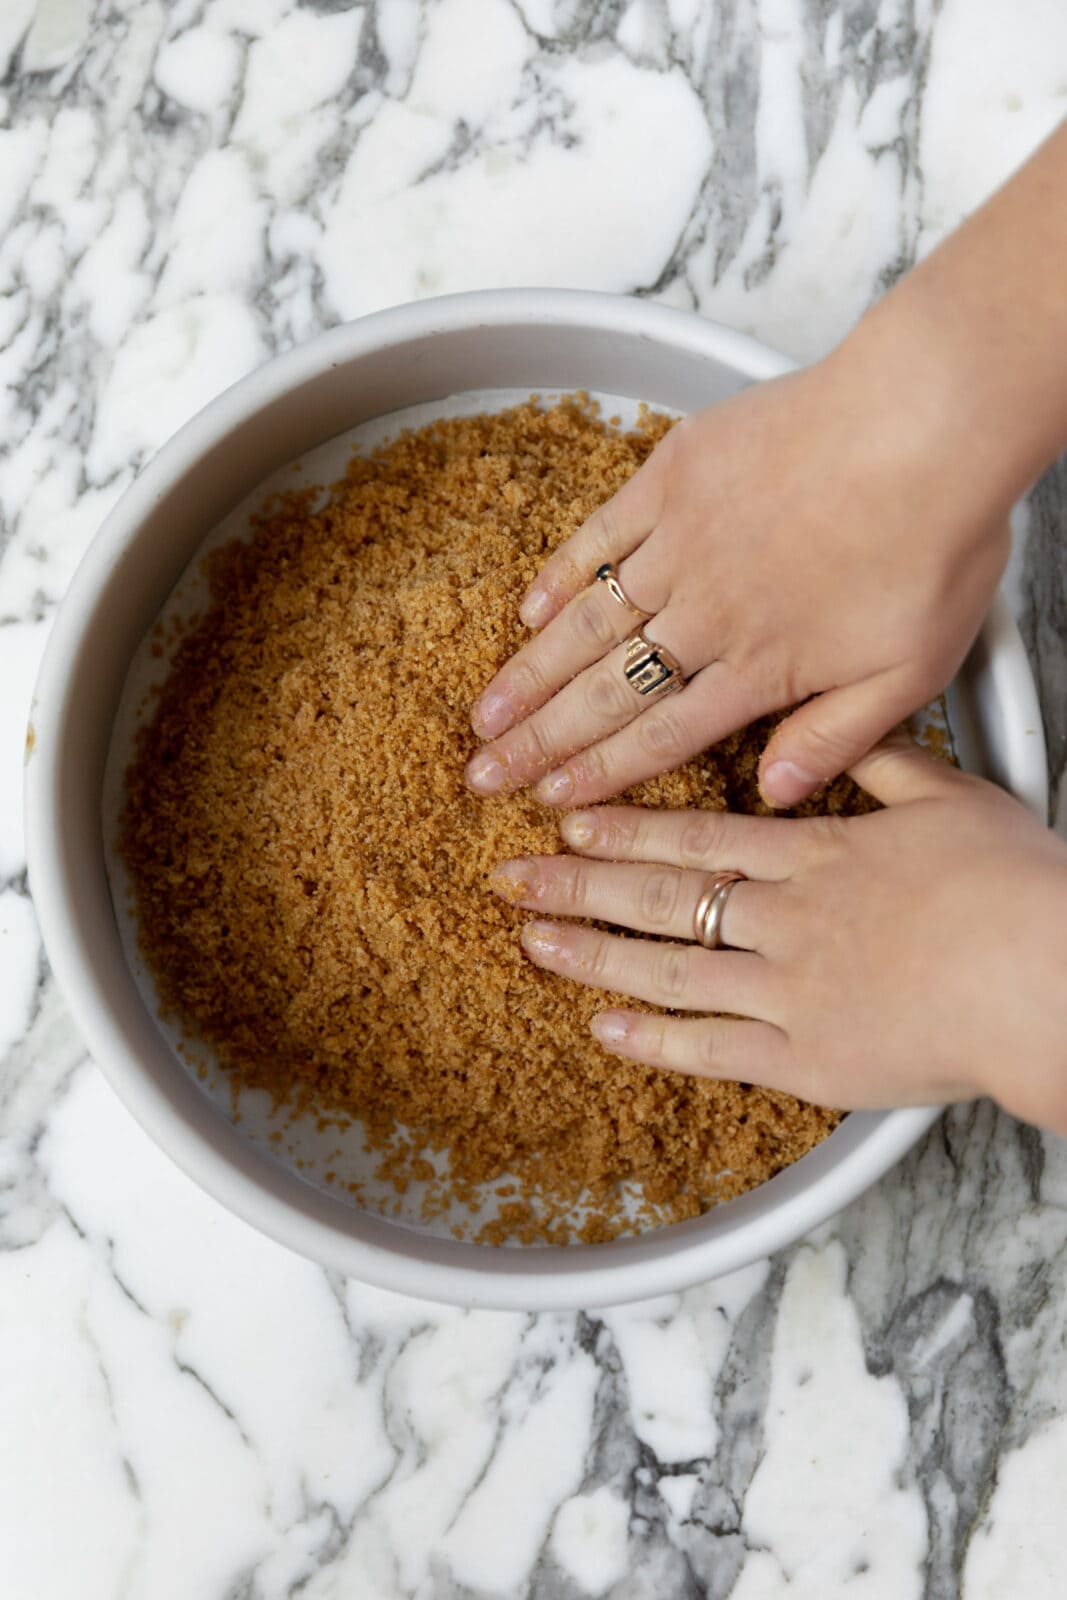 packing graham cracker crust into a pan